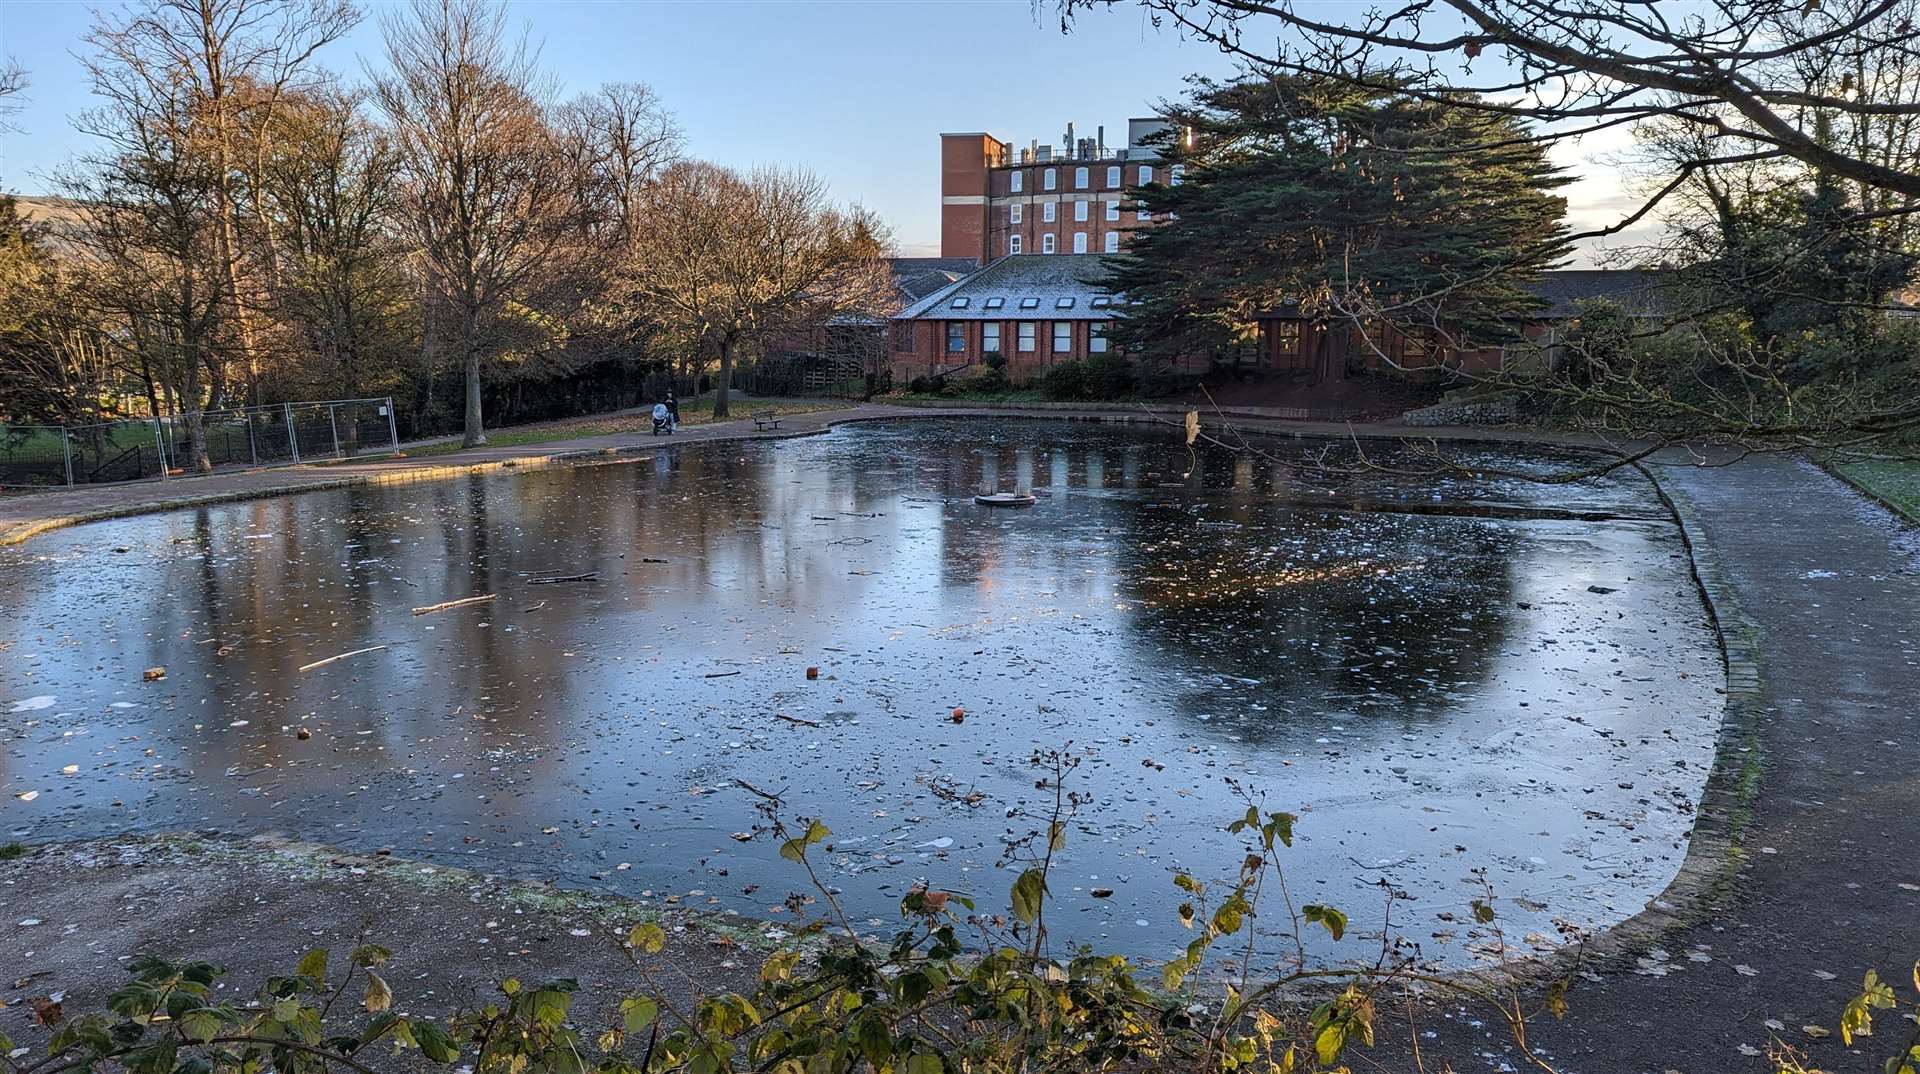 Ponds have frozen over in the sub-zero conditions